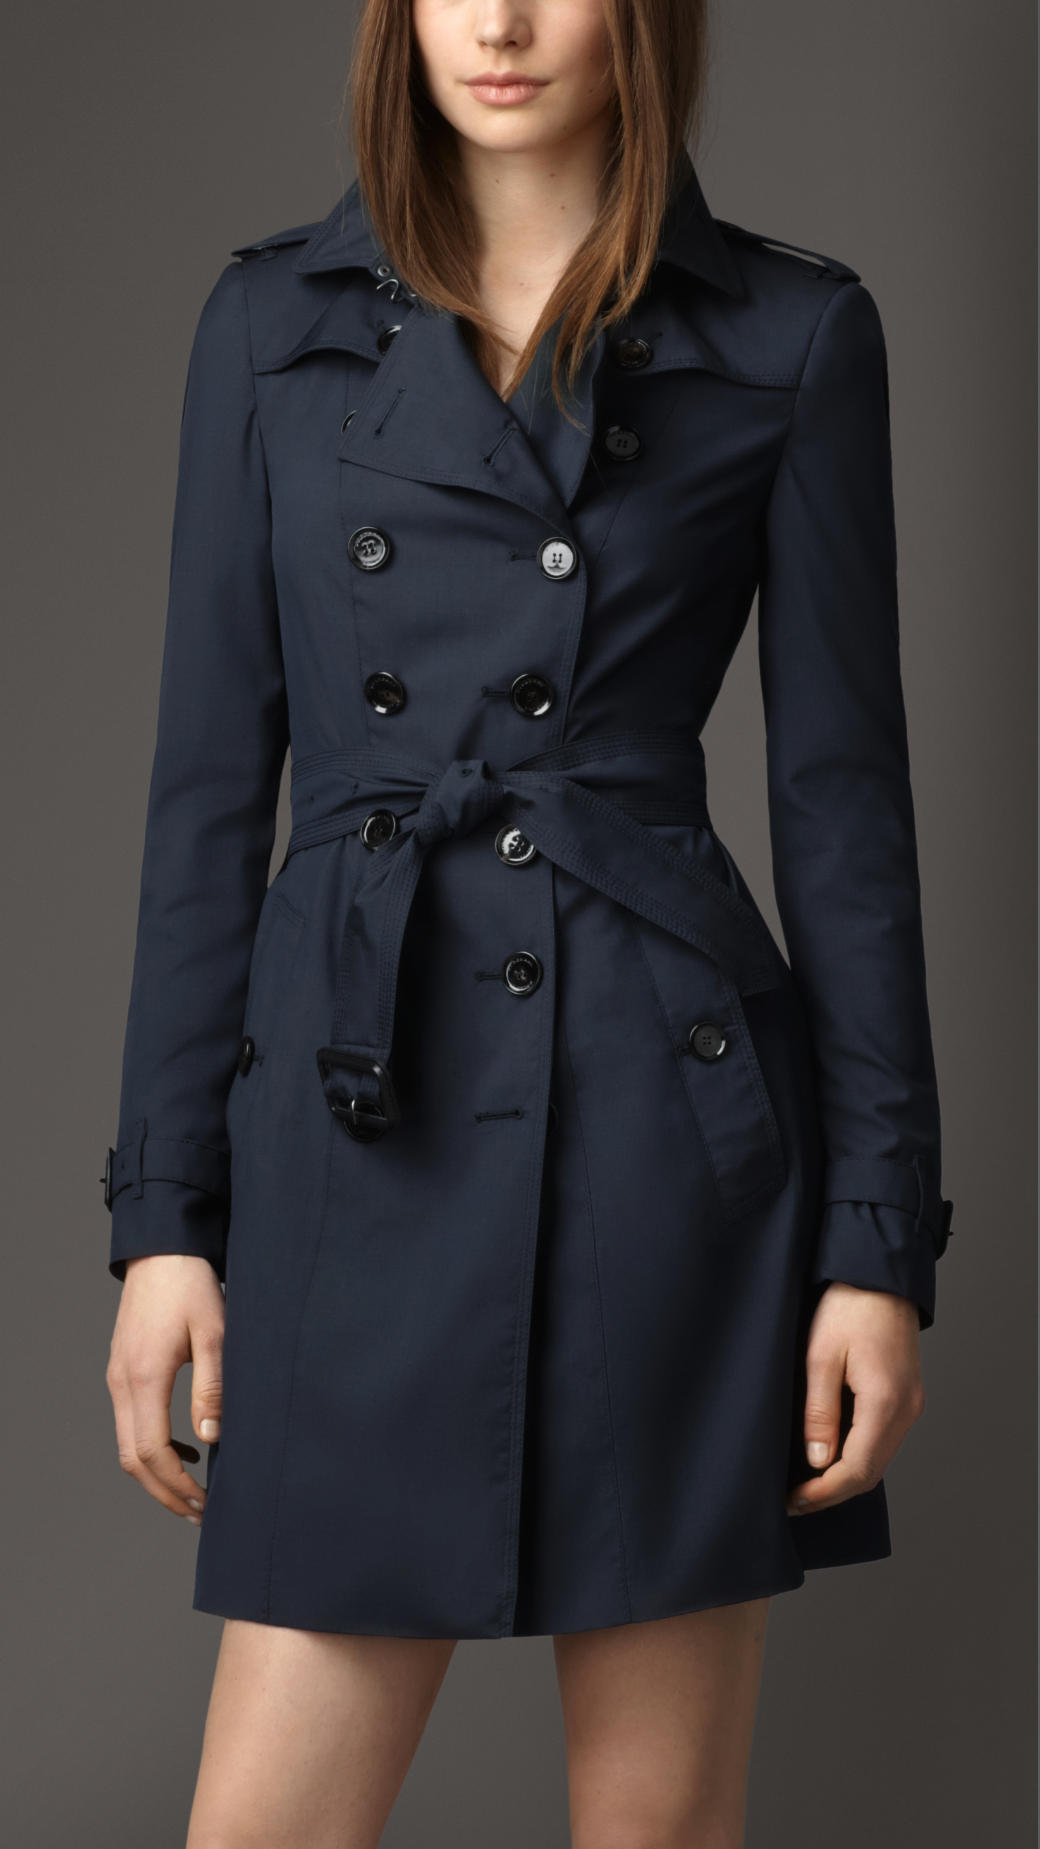 Lyst - Burberry Wool Silk Trench Coat in Blue